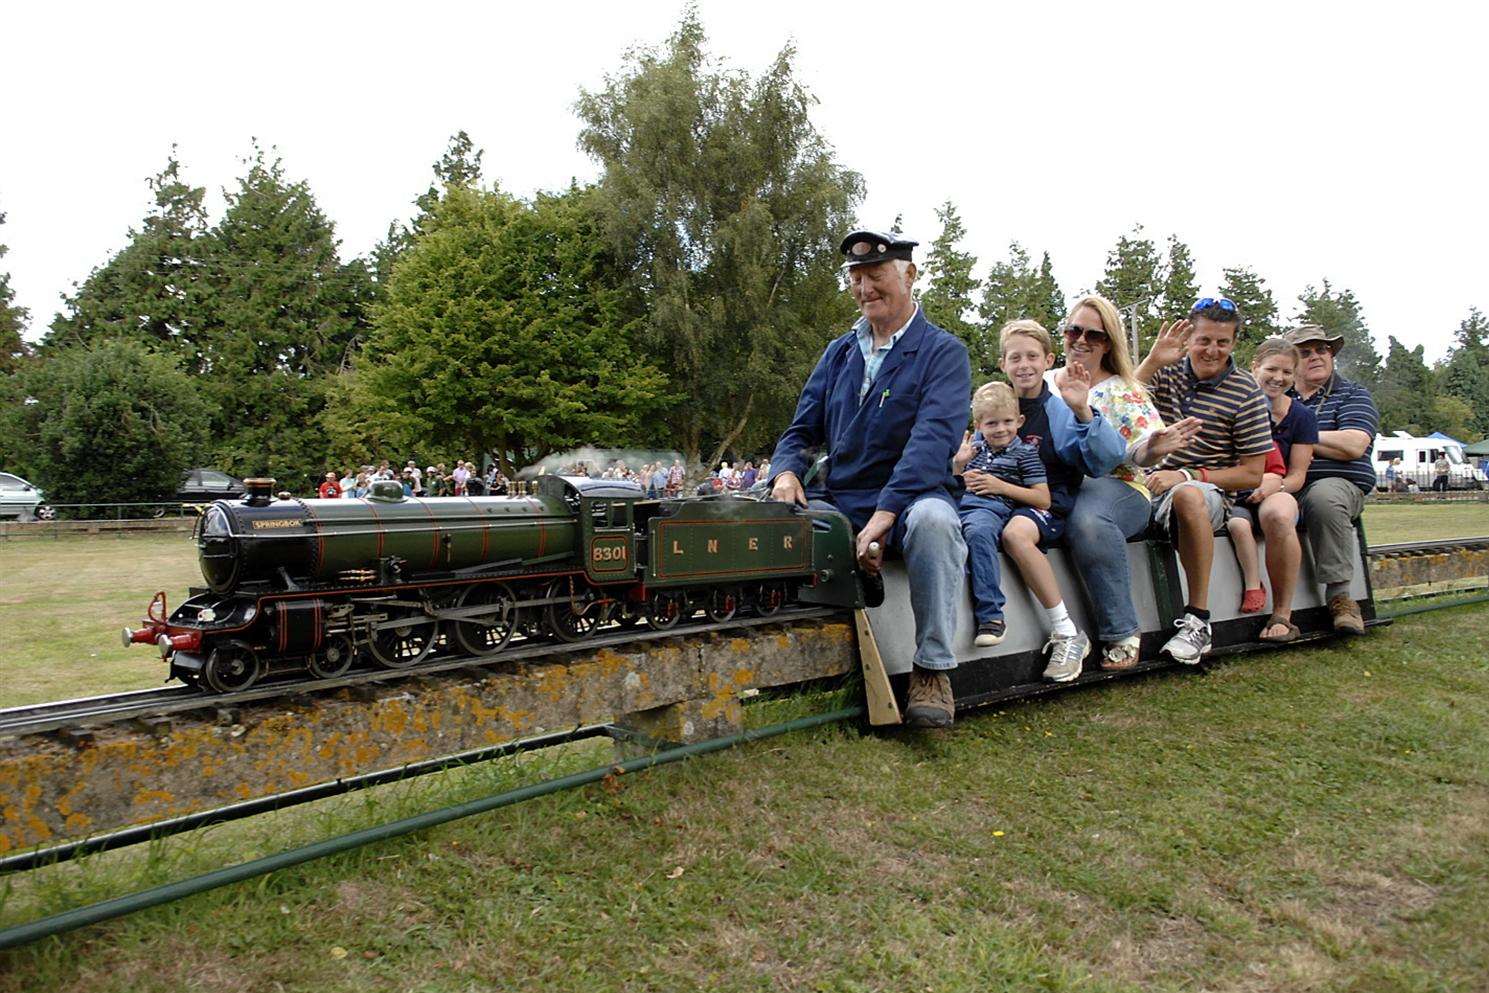 The annual Trains and Traction event at Sturry